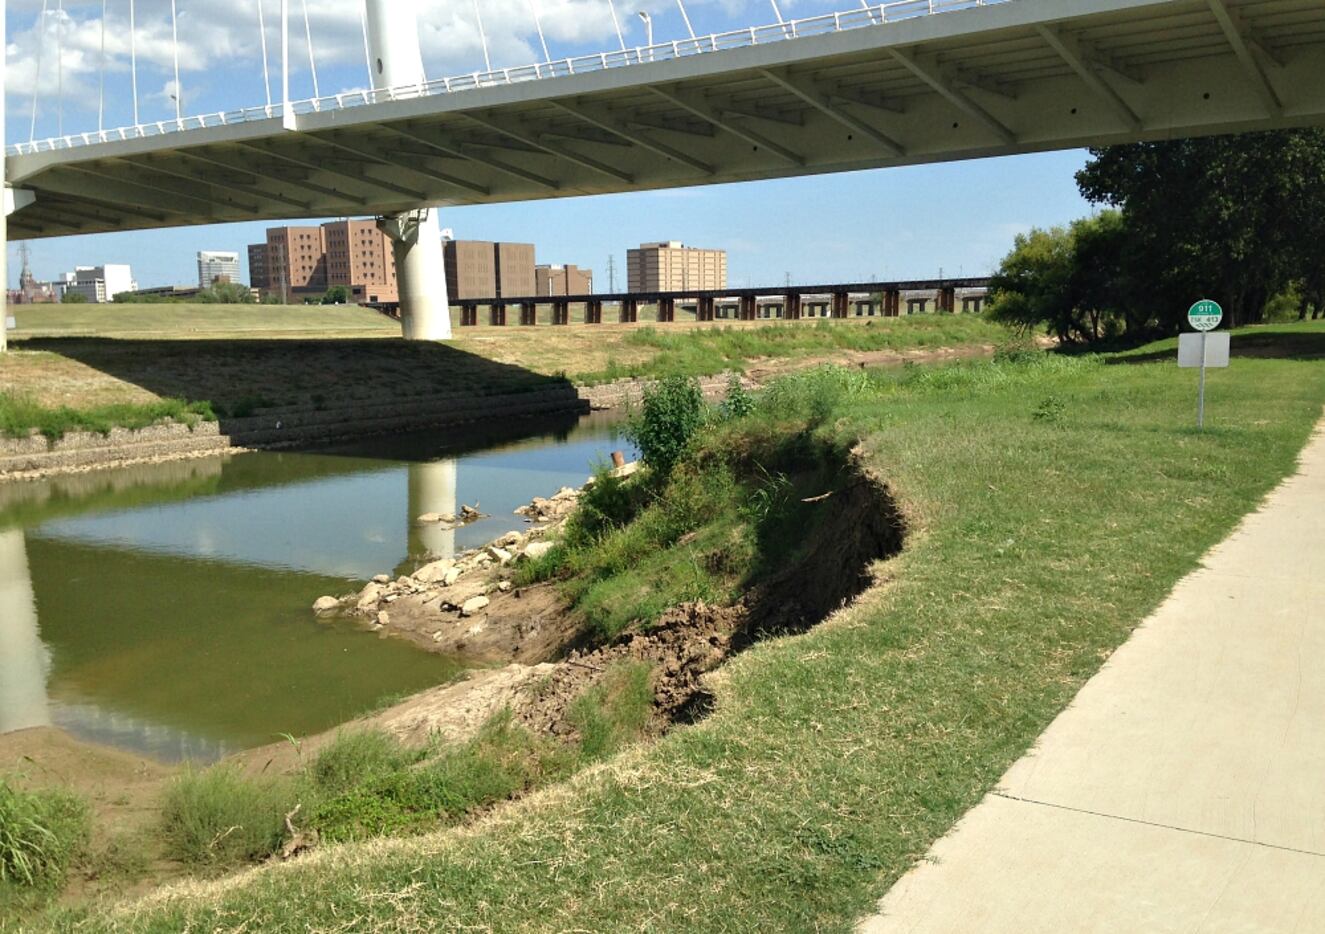 The space between the Trinity River and Trinity Skyline Trail is getting dangerously small.